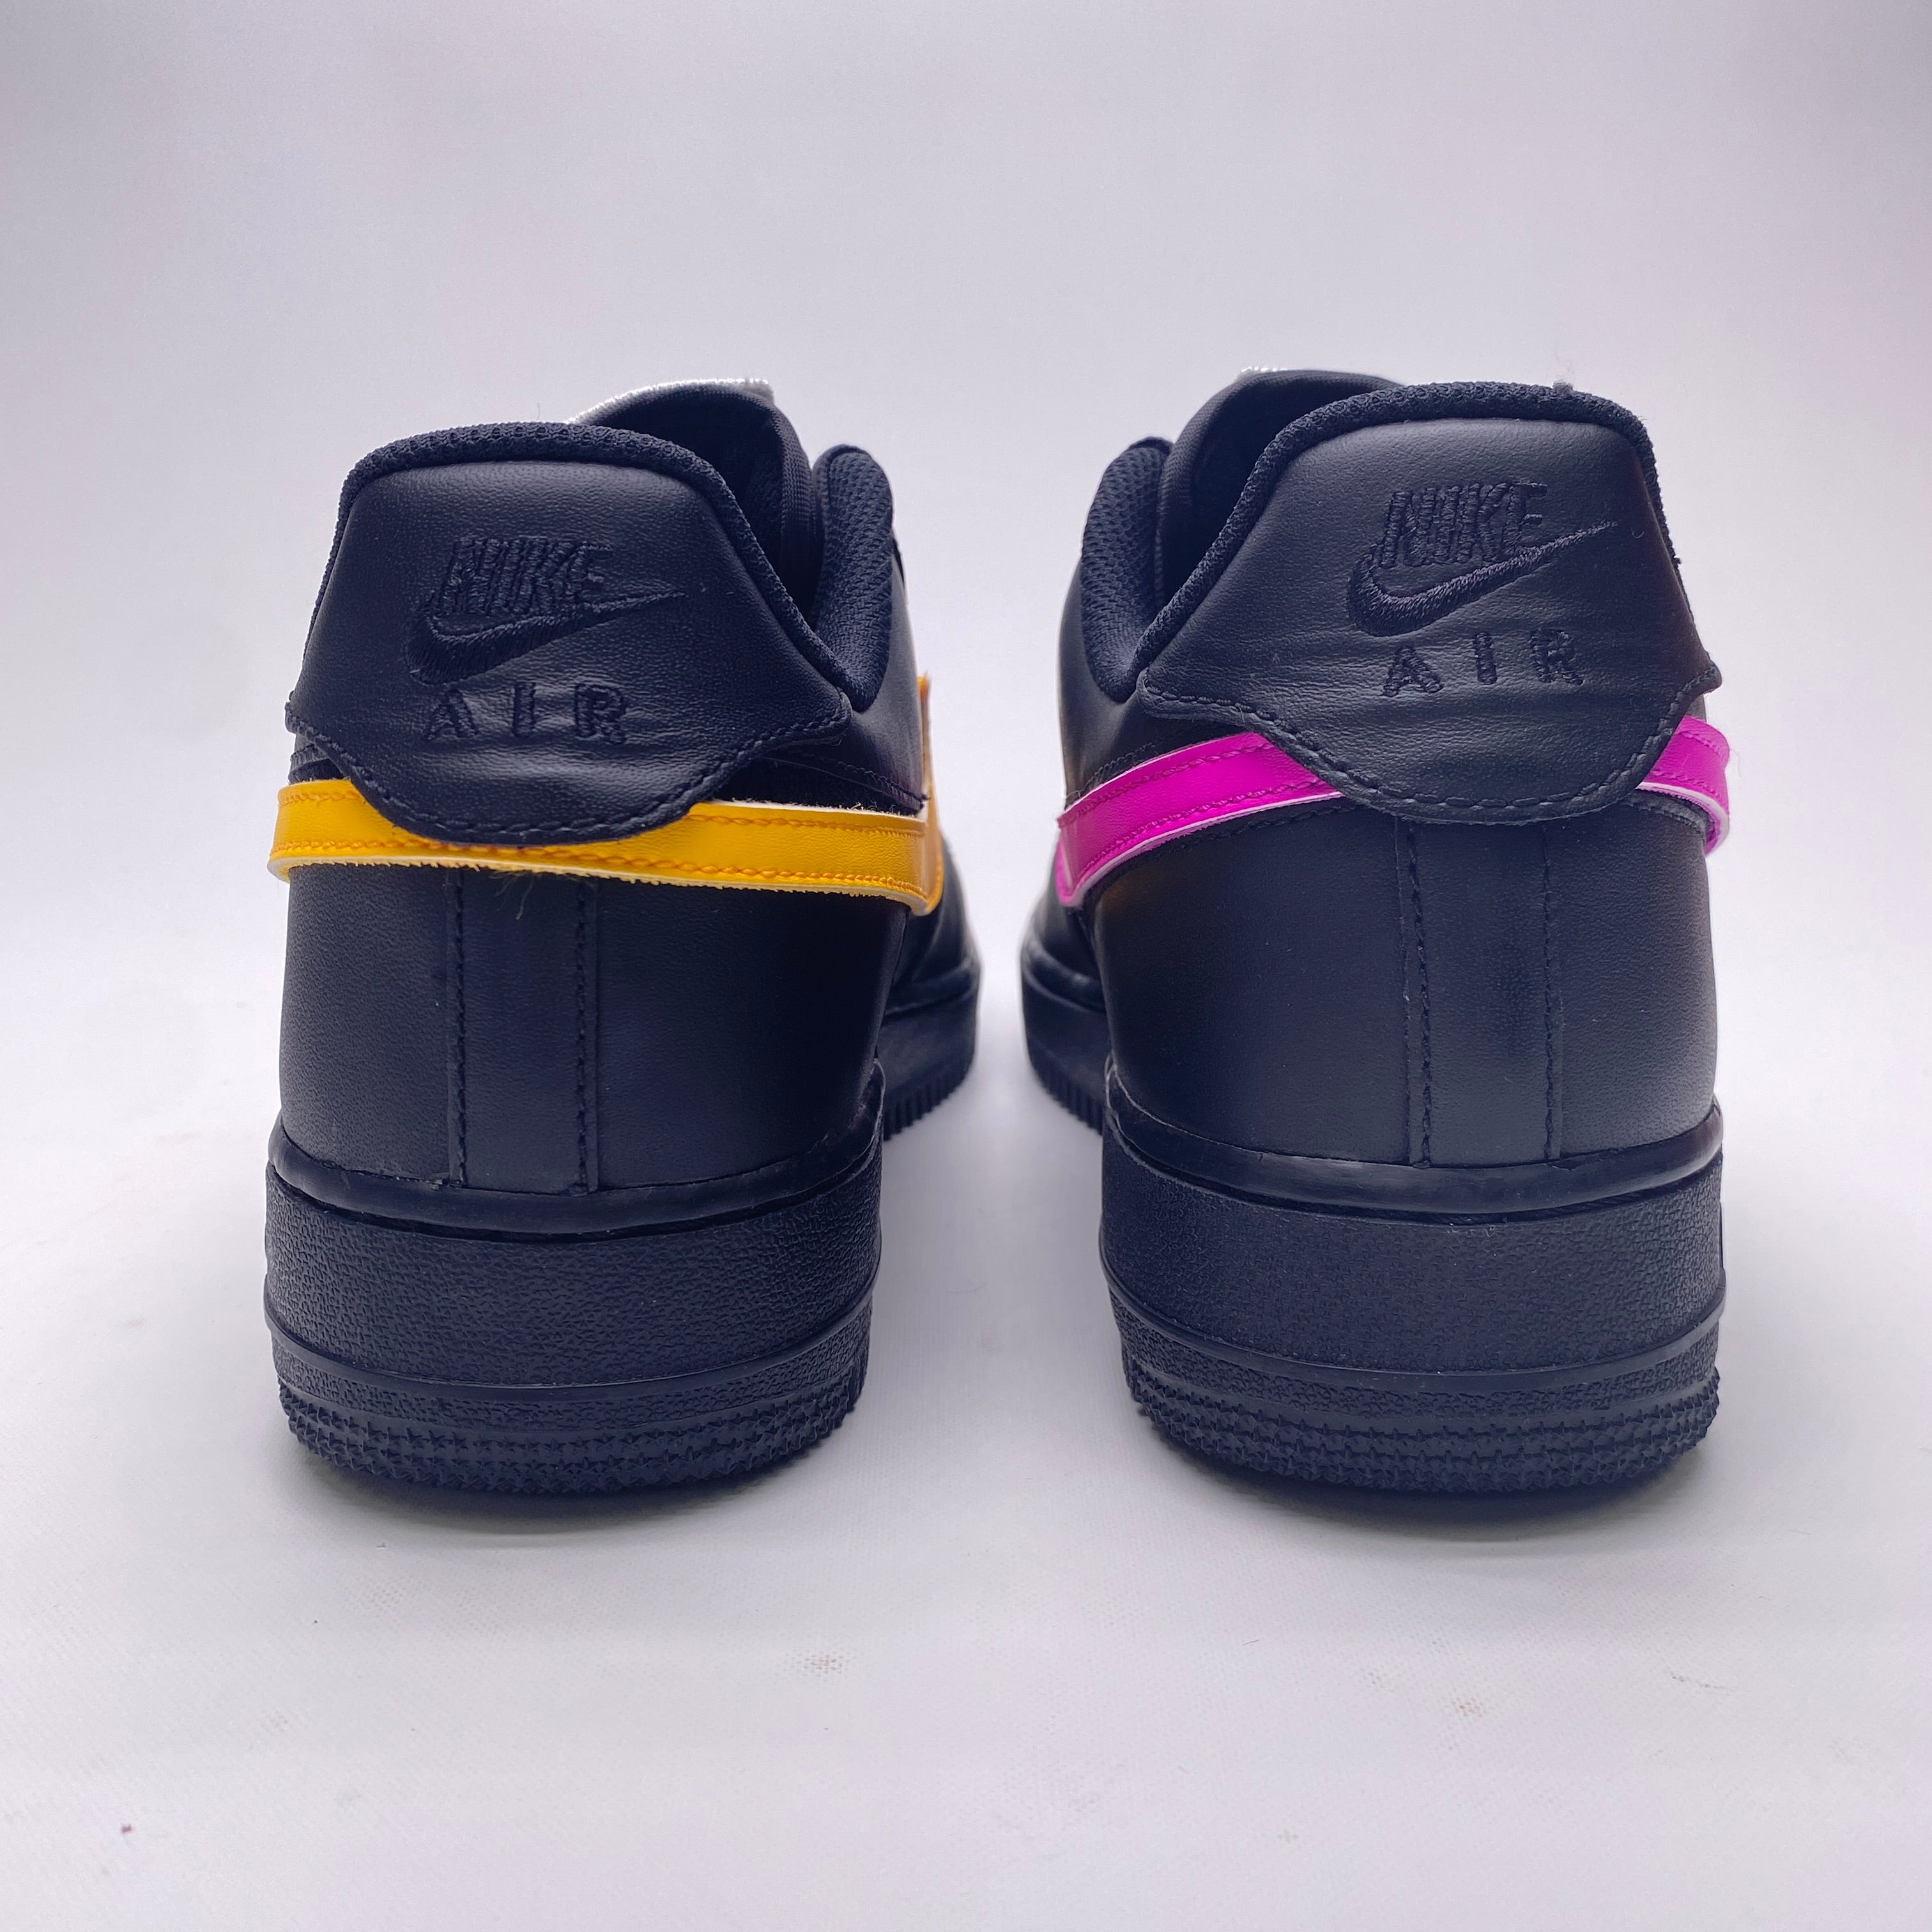 Nike Air Force 1 &quot;Swoosh Pack Black&quot; 2018 New Size 8